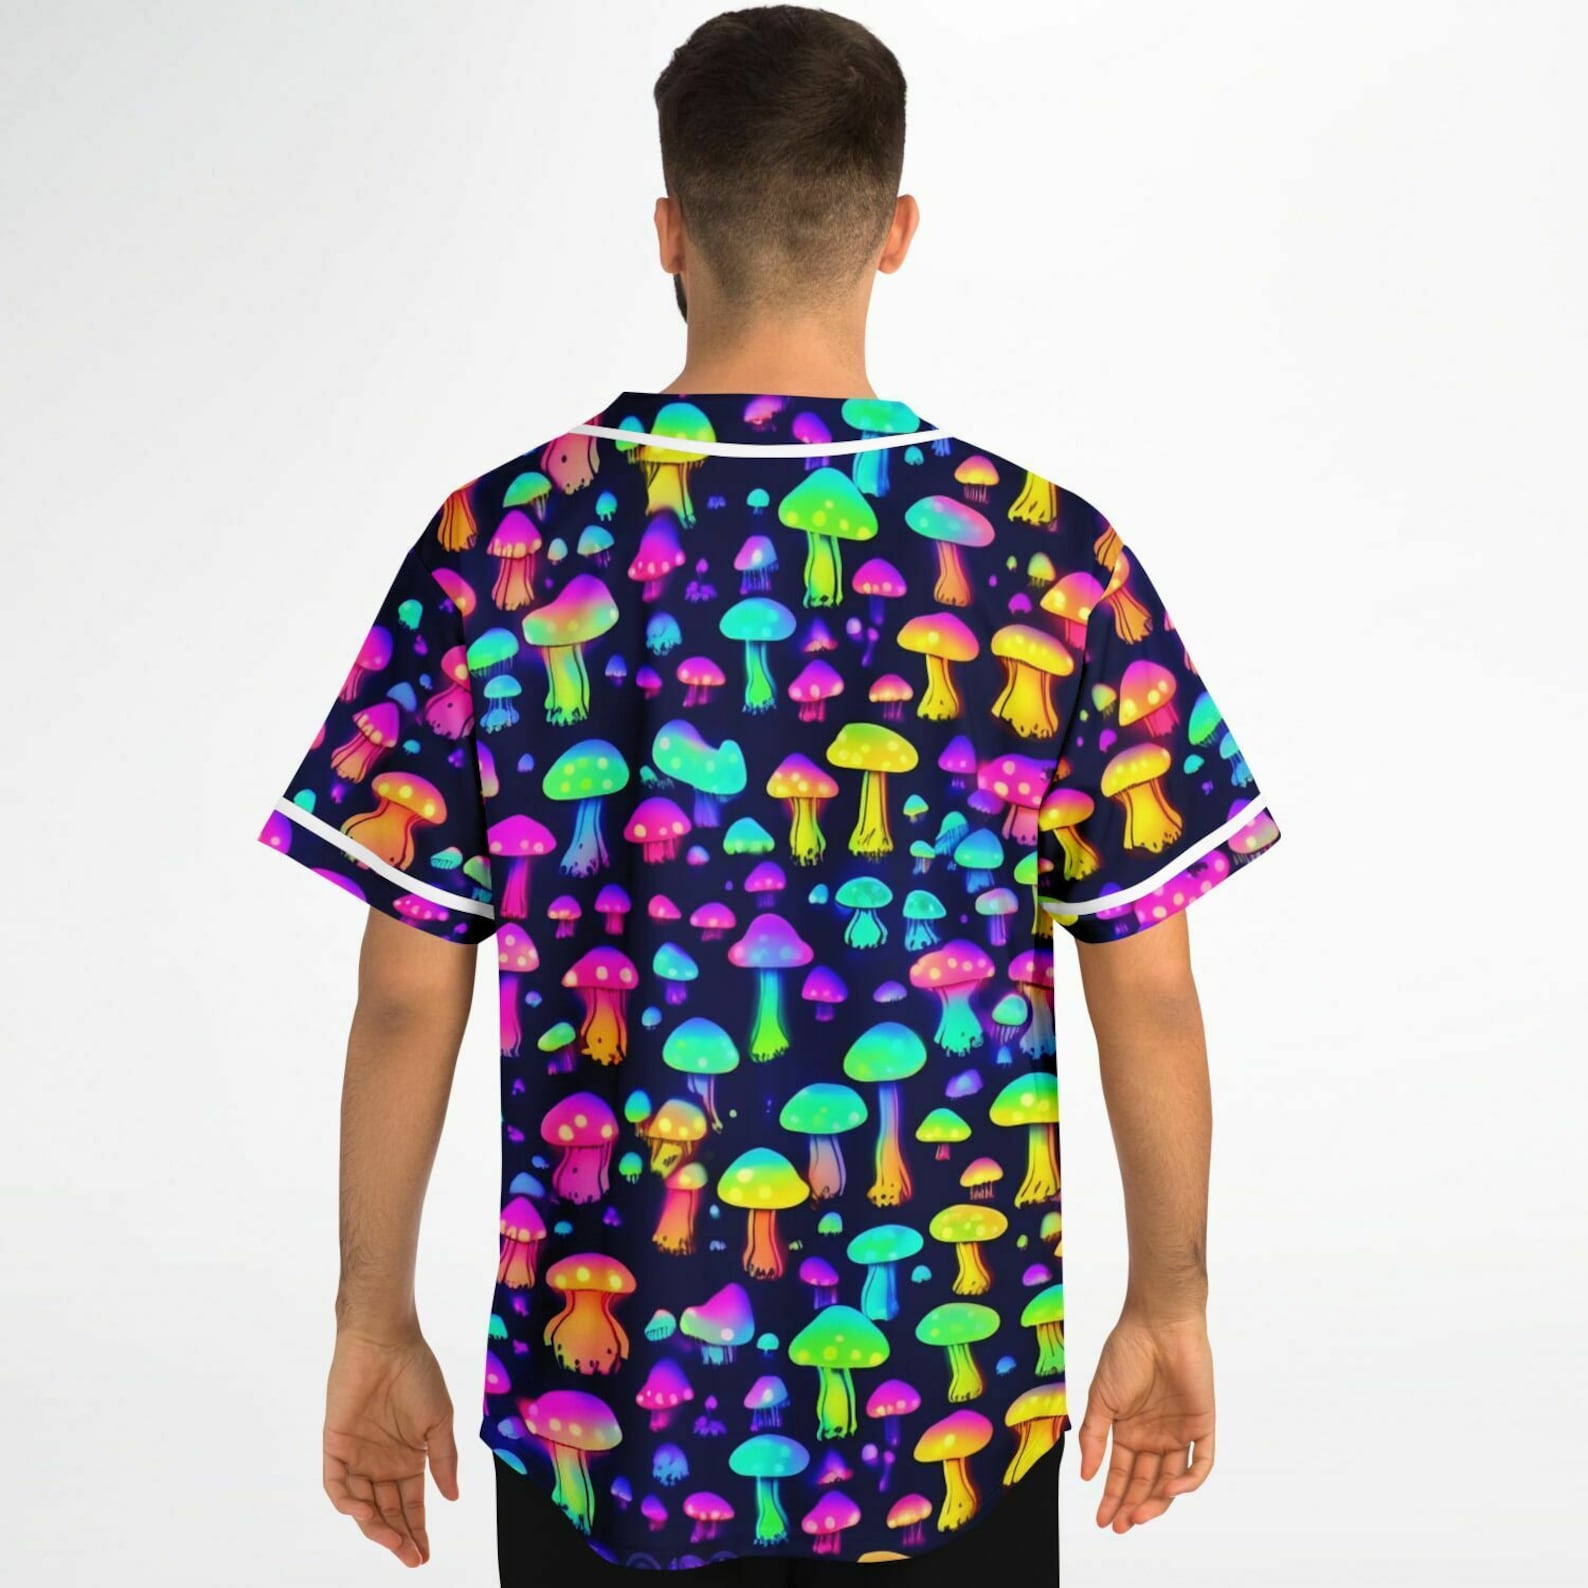 Rave Jersey Customizable Psychedelic Mushrooms Customizable Rave Outfit ...